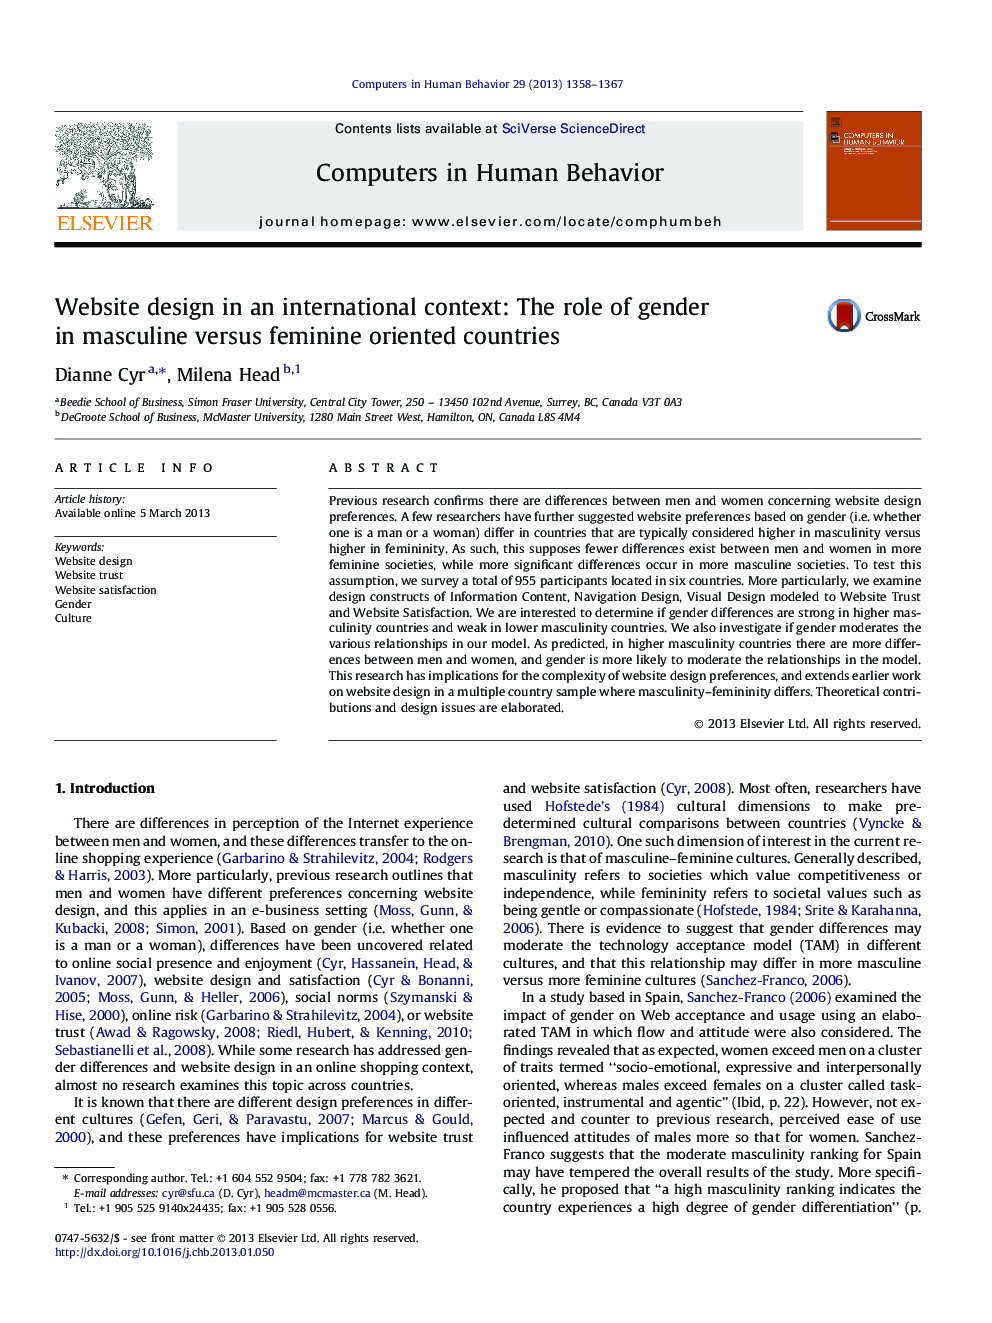 Website design in an international context: The role of gender in masculine versus feminine oriented countries